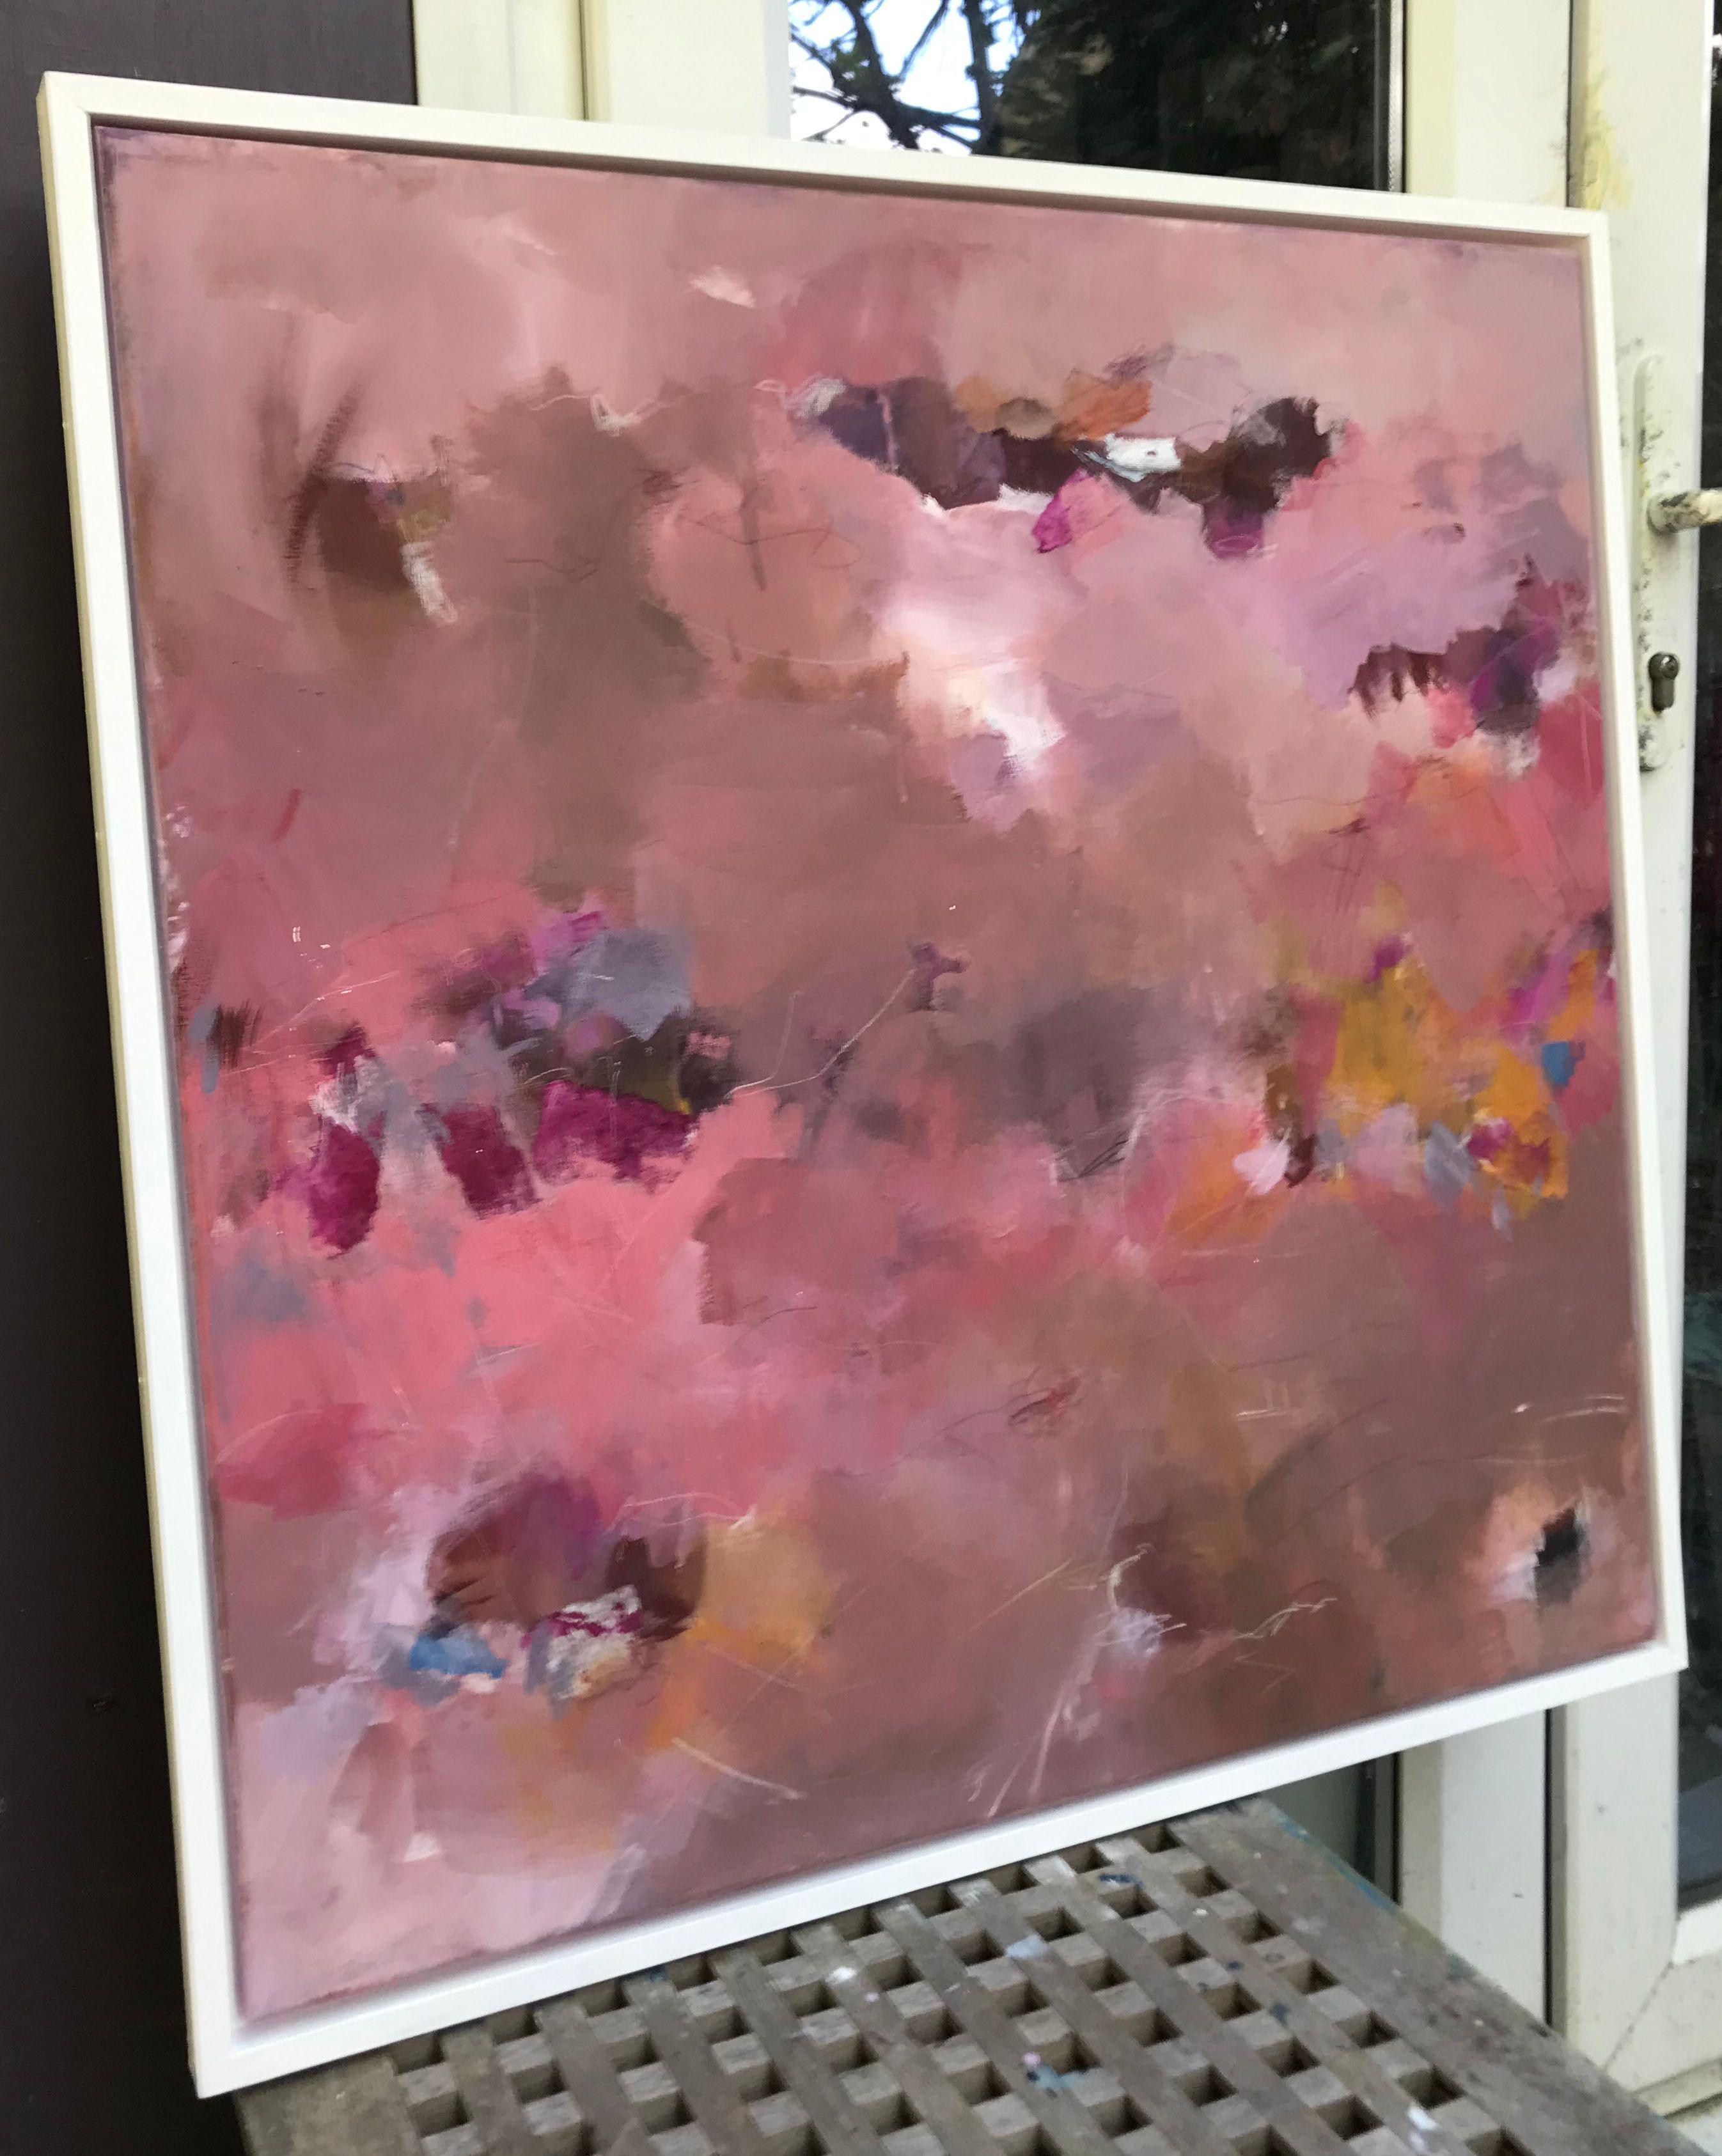 This large, statement painting has been built over many thin layers of paint and grew out of a slow process. The starting point for this piece has been the colour scheme of warm, dusty pinks and chocolate brown, sprinkled with some brighter touches